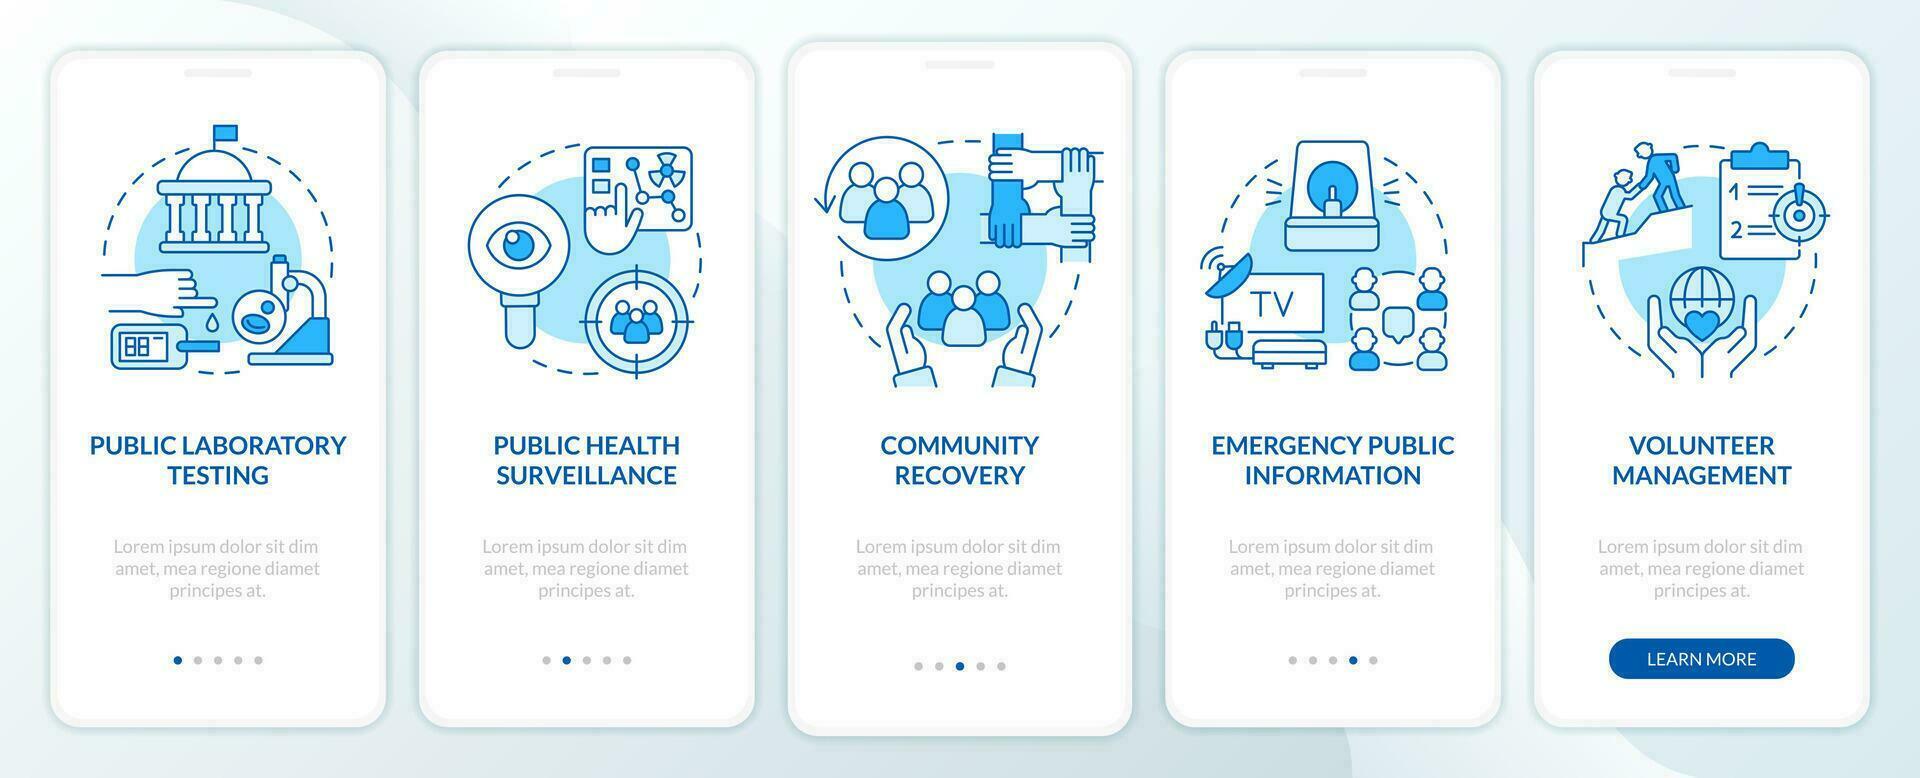 Public health preparedness blue onboarding mobile app screen. Walkthrough 4 steps editable graphic instructions with linear concepts. UI, UX, GUI templated vector